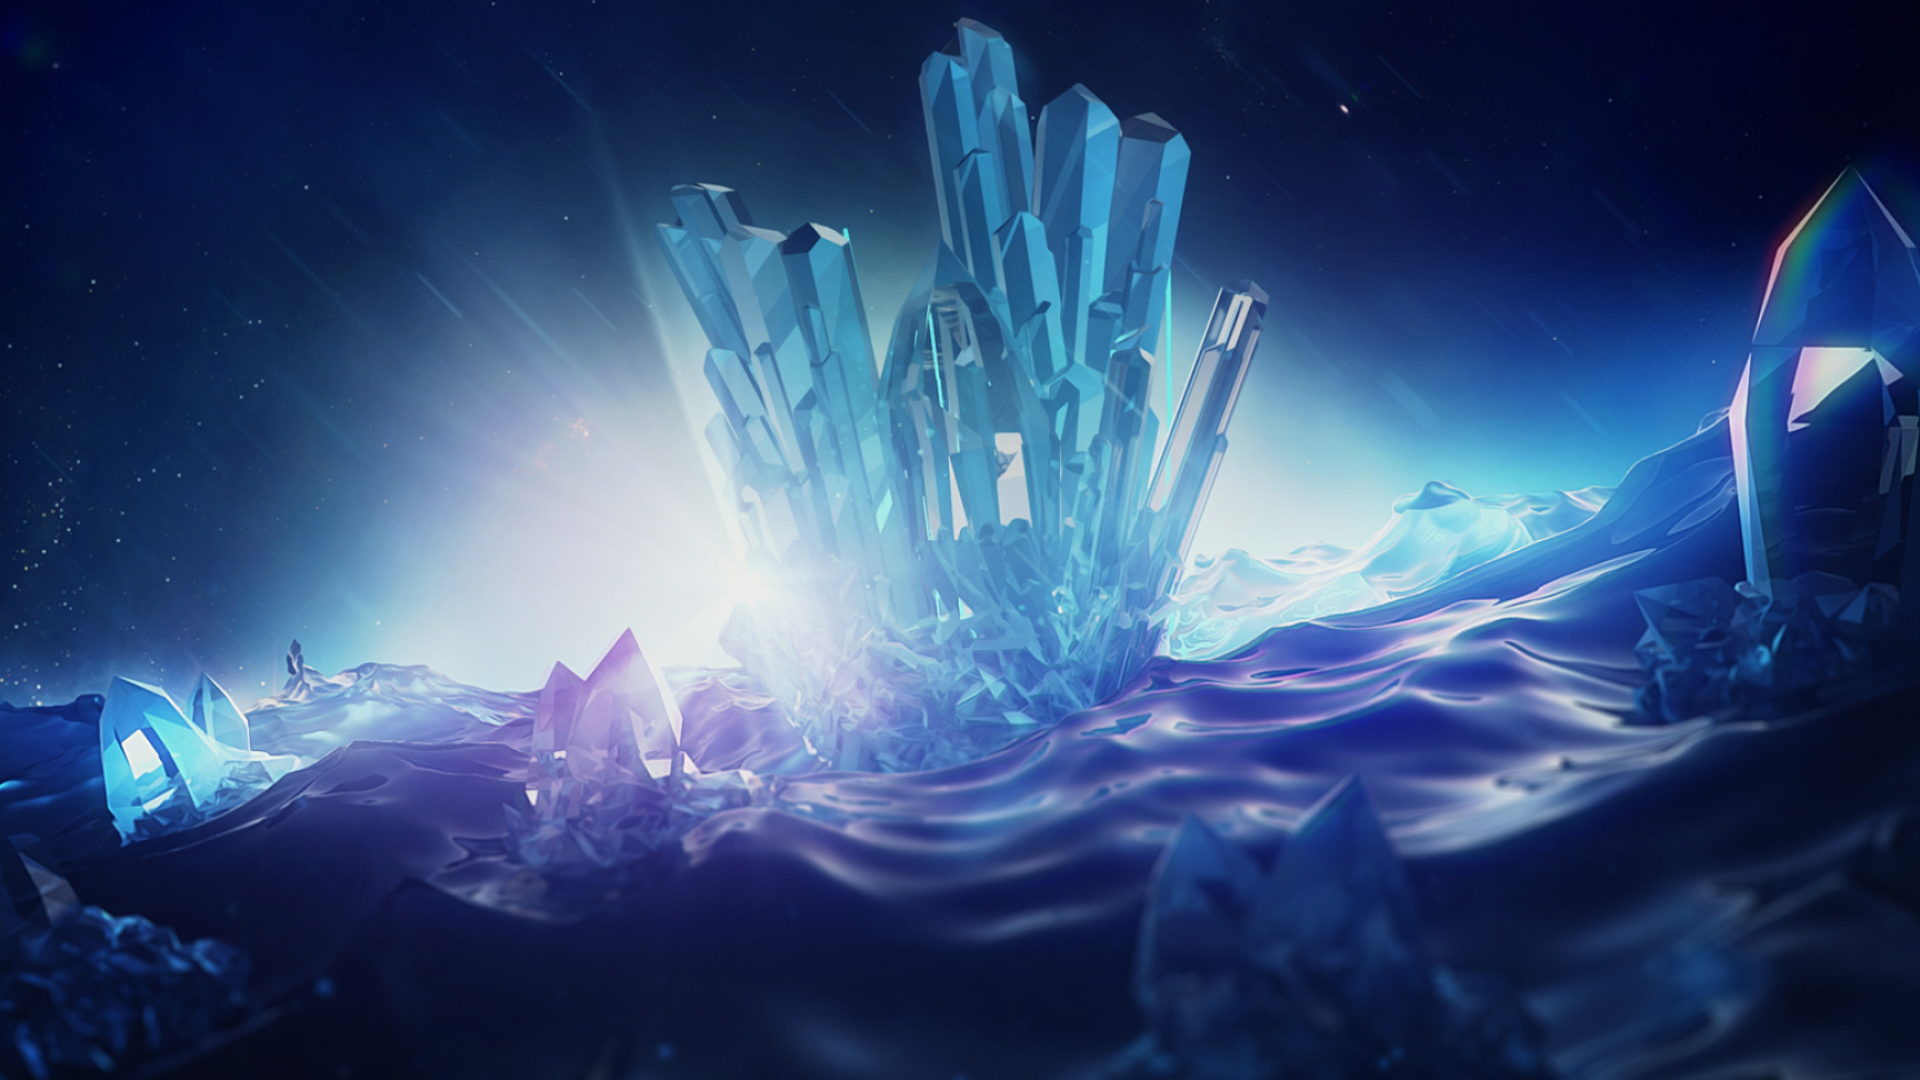 20+ Artistic Crystal HD Wallpapers and Backgrounds 1920x1080